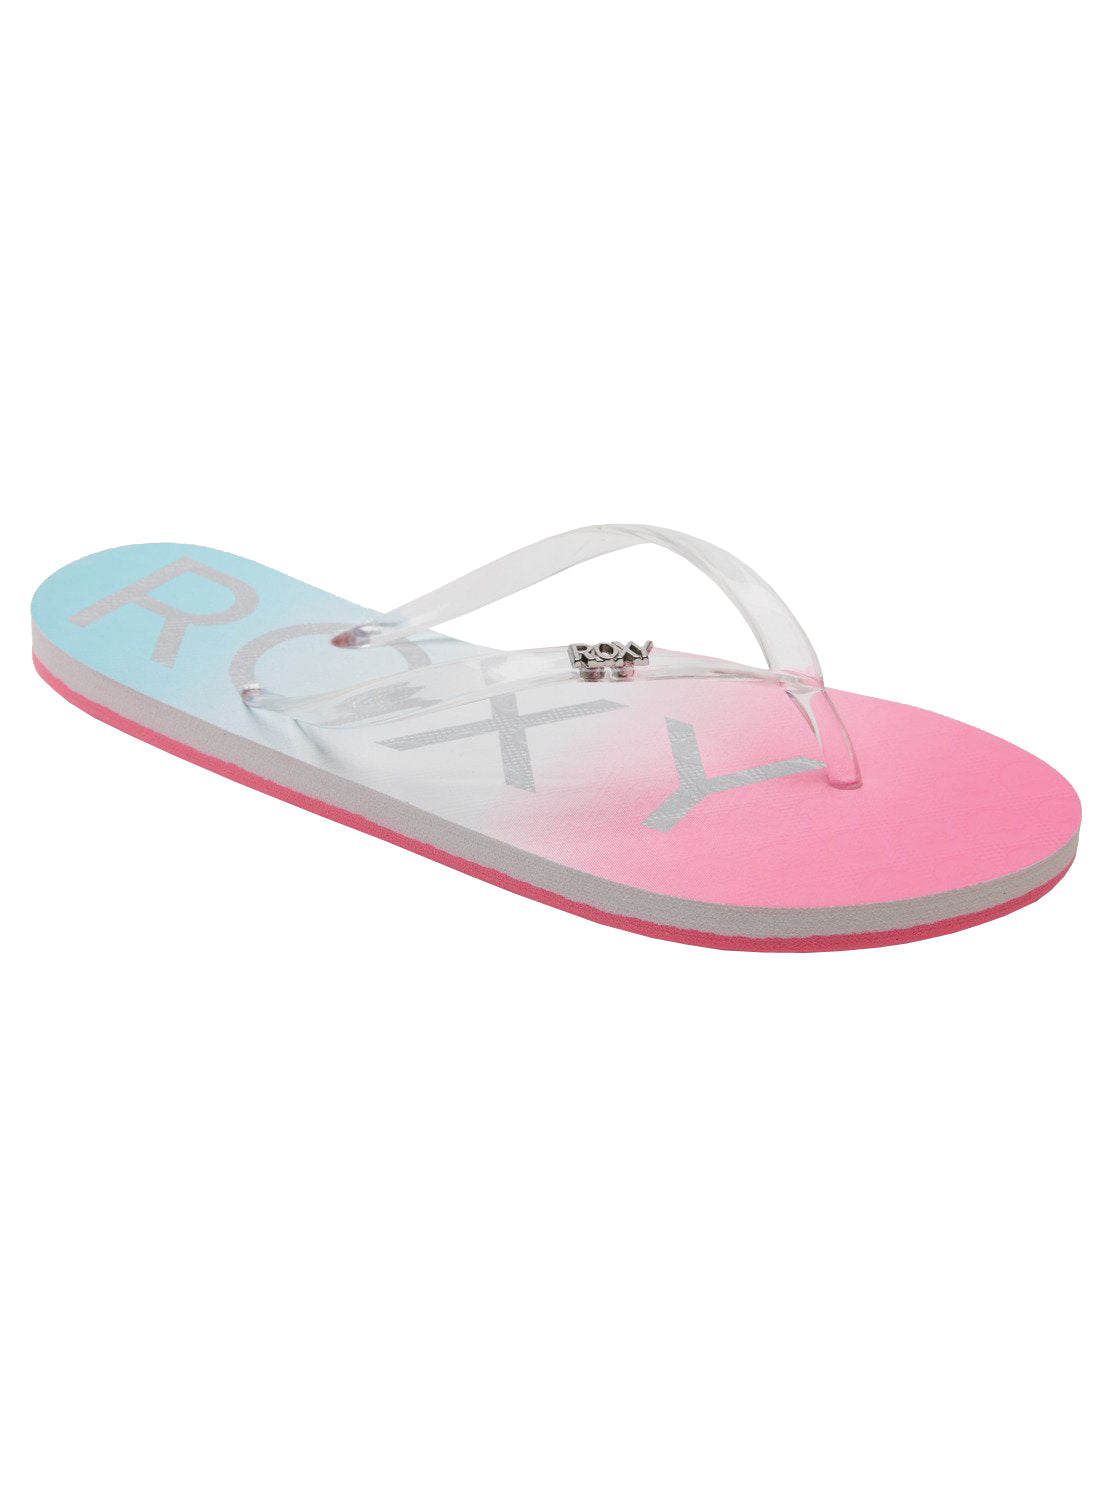 Roxy Viva Jelly Womens Sandal WCQ-White-Crazy Pink-Turquoise 11